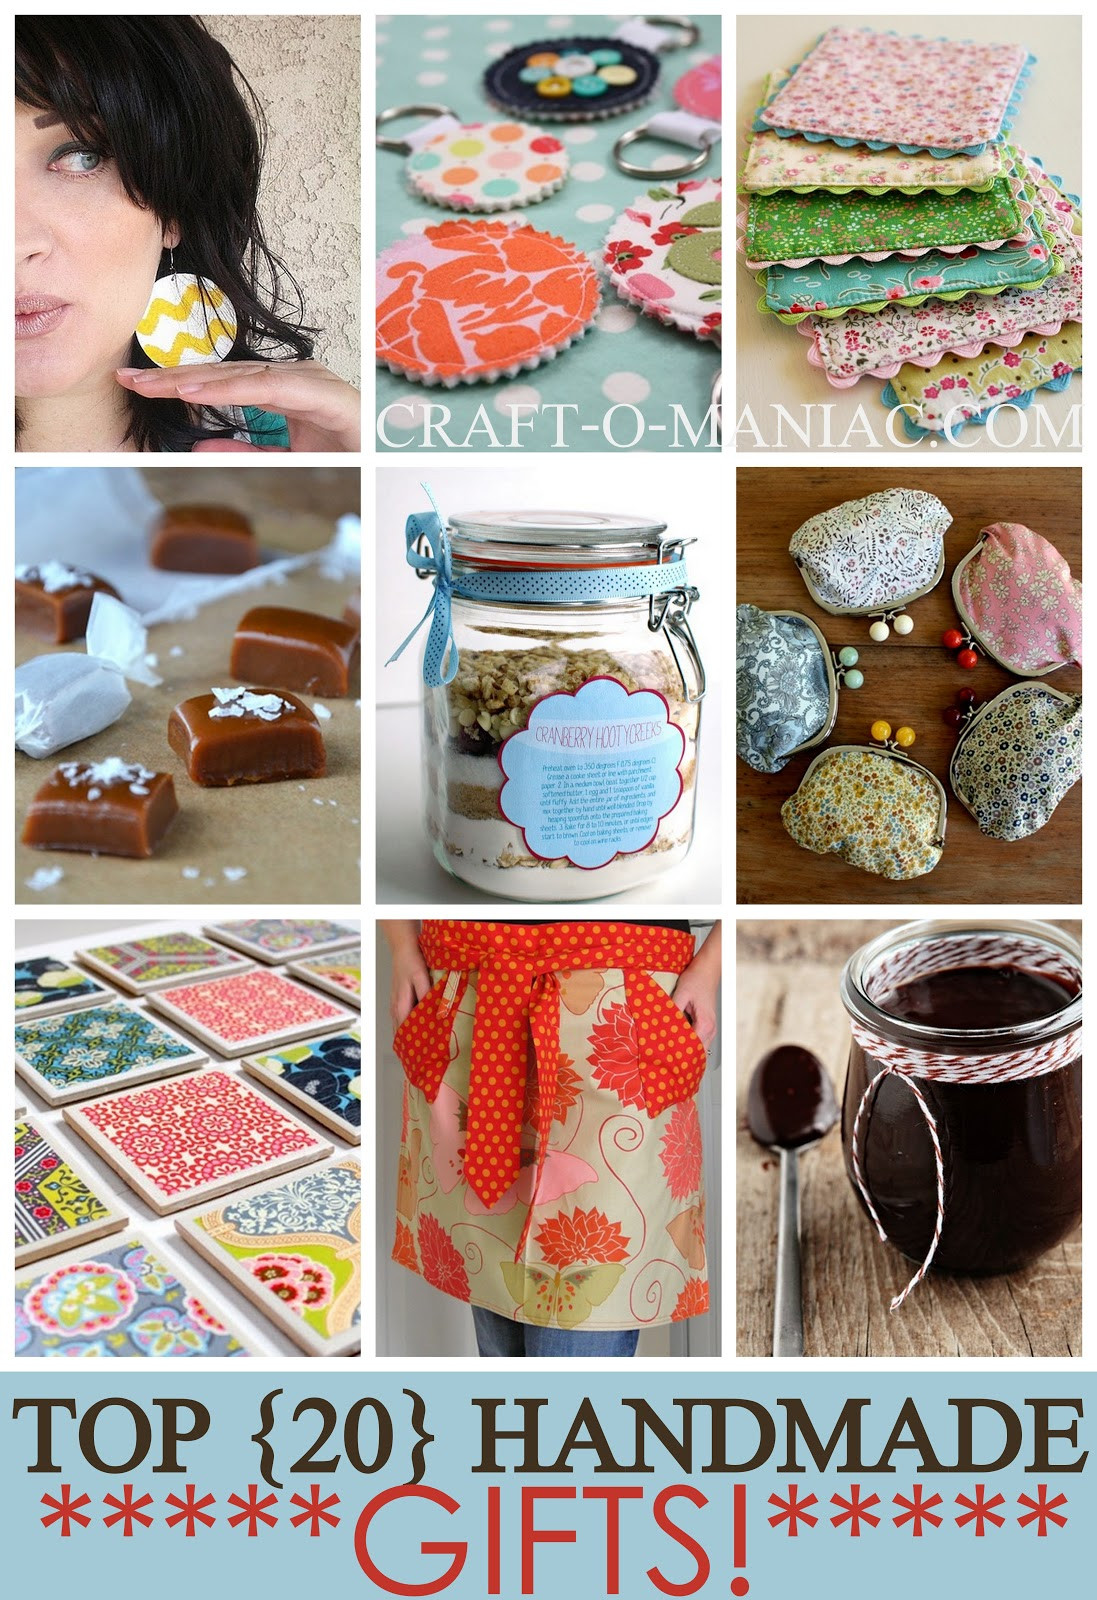 Crafty Gift Ideas
 Top 20 Handmade Gifts